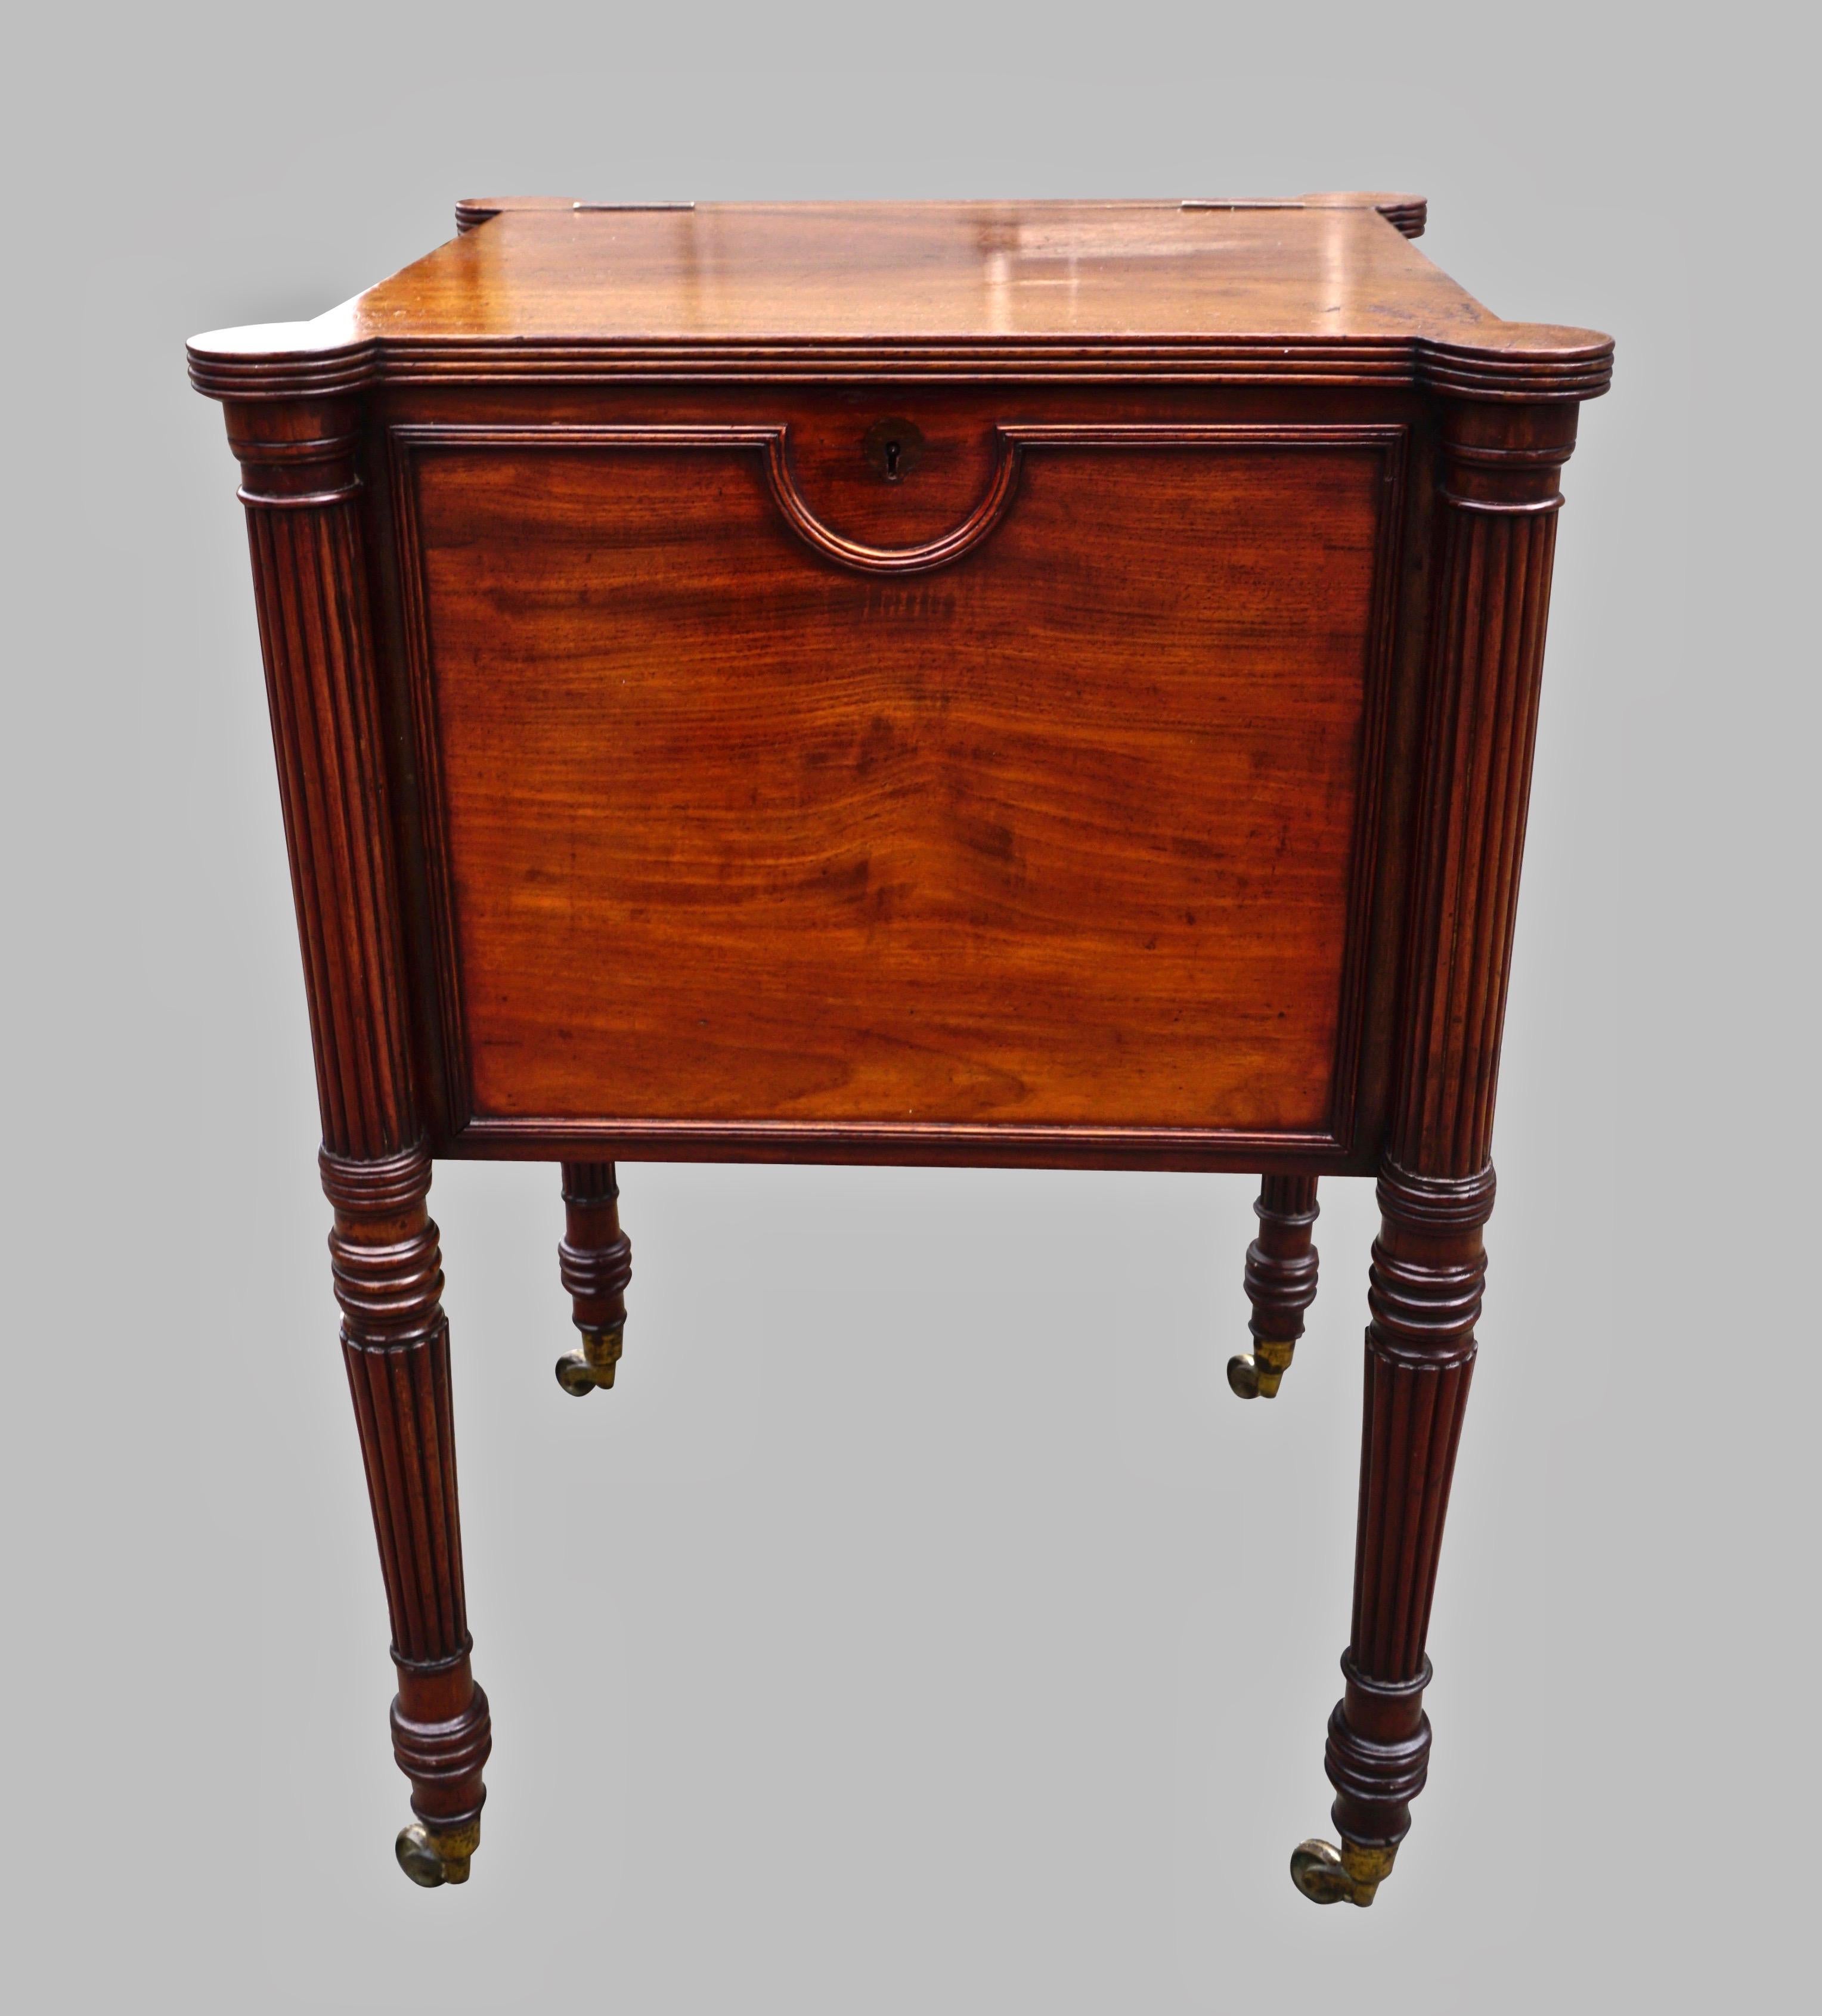 A fine quality English early nineteenth century cellarette in the manner of Gillows, made of the finest matched solid mahogany timber, the shaped top opening to reveal 2 covered compartments, the reeded legs ending in brass caps retaining their